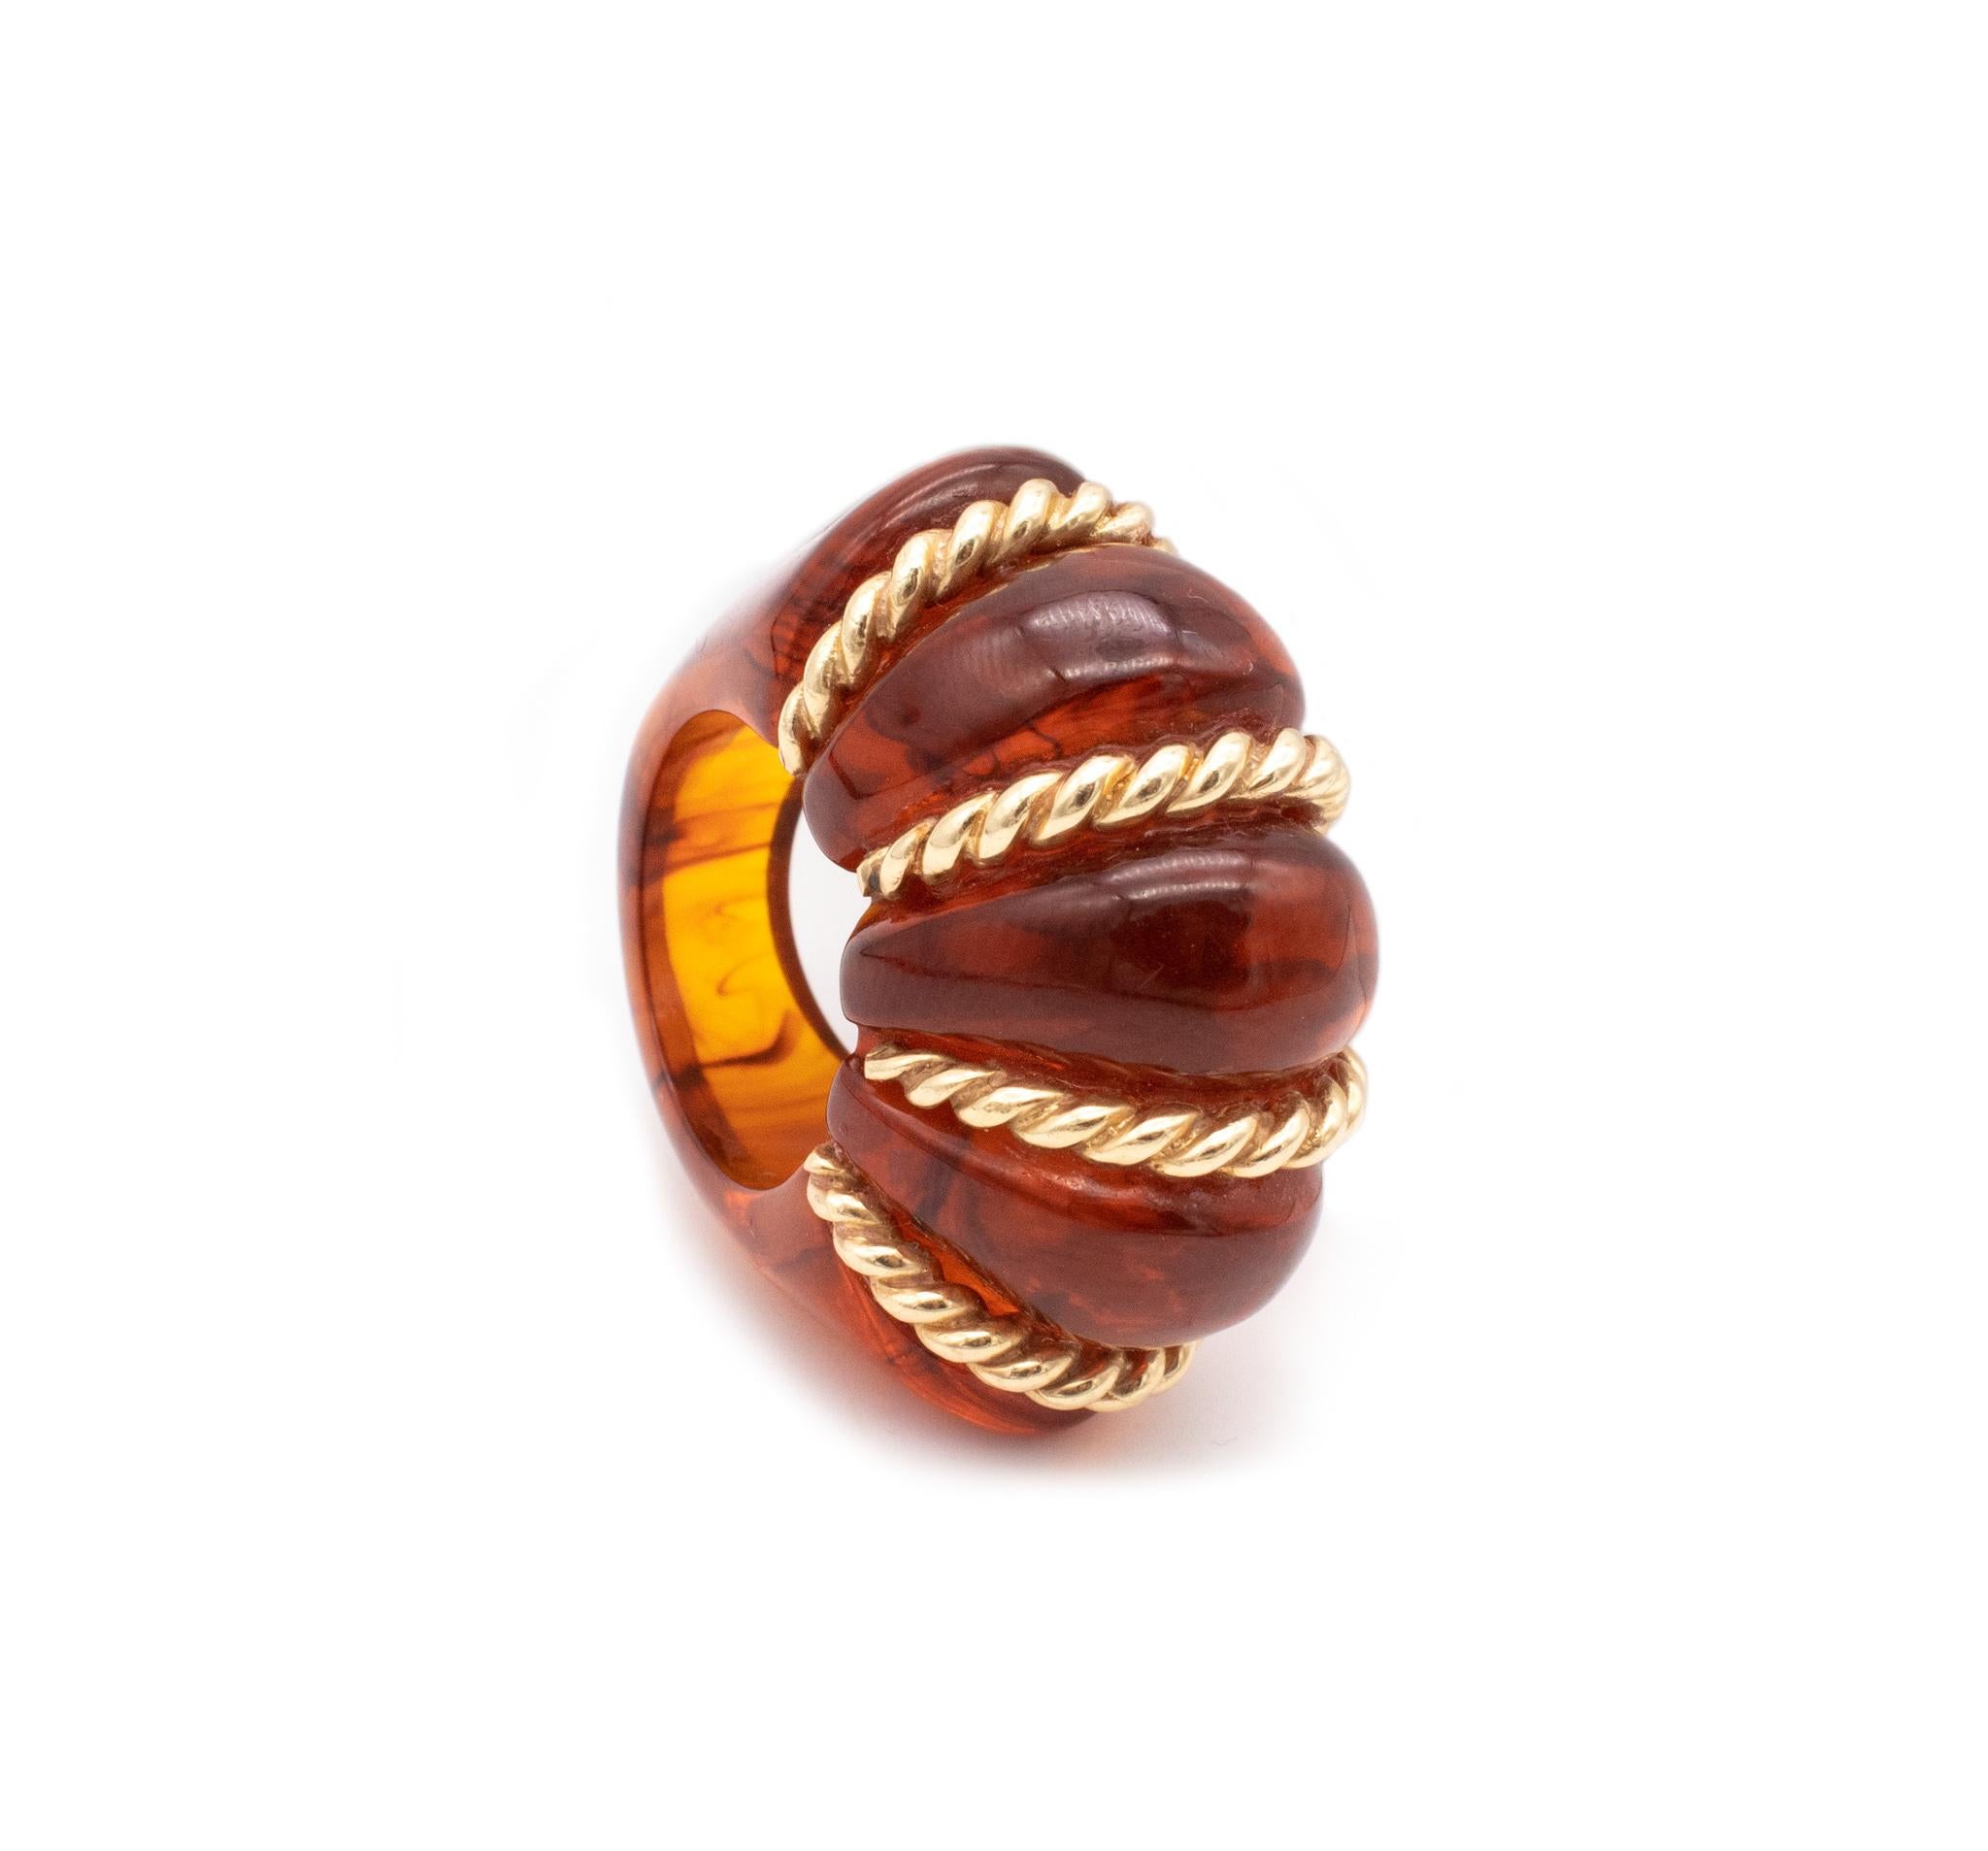 Seaman Schepps 1950 New York Very Rare 18Kt Gold Wired Ring Carved in Amber In Excellent Condition For Sale In Miami, FL